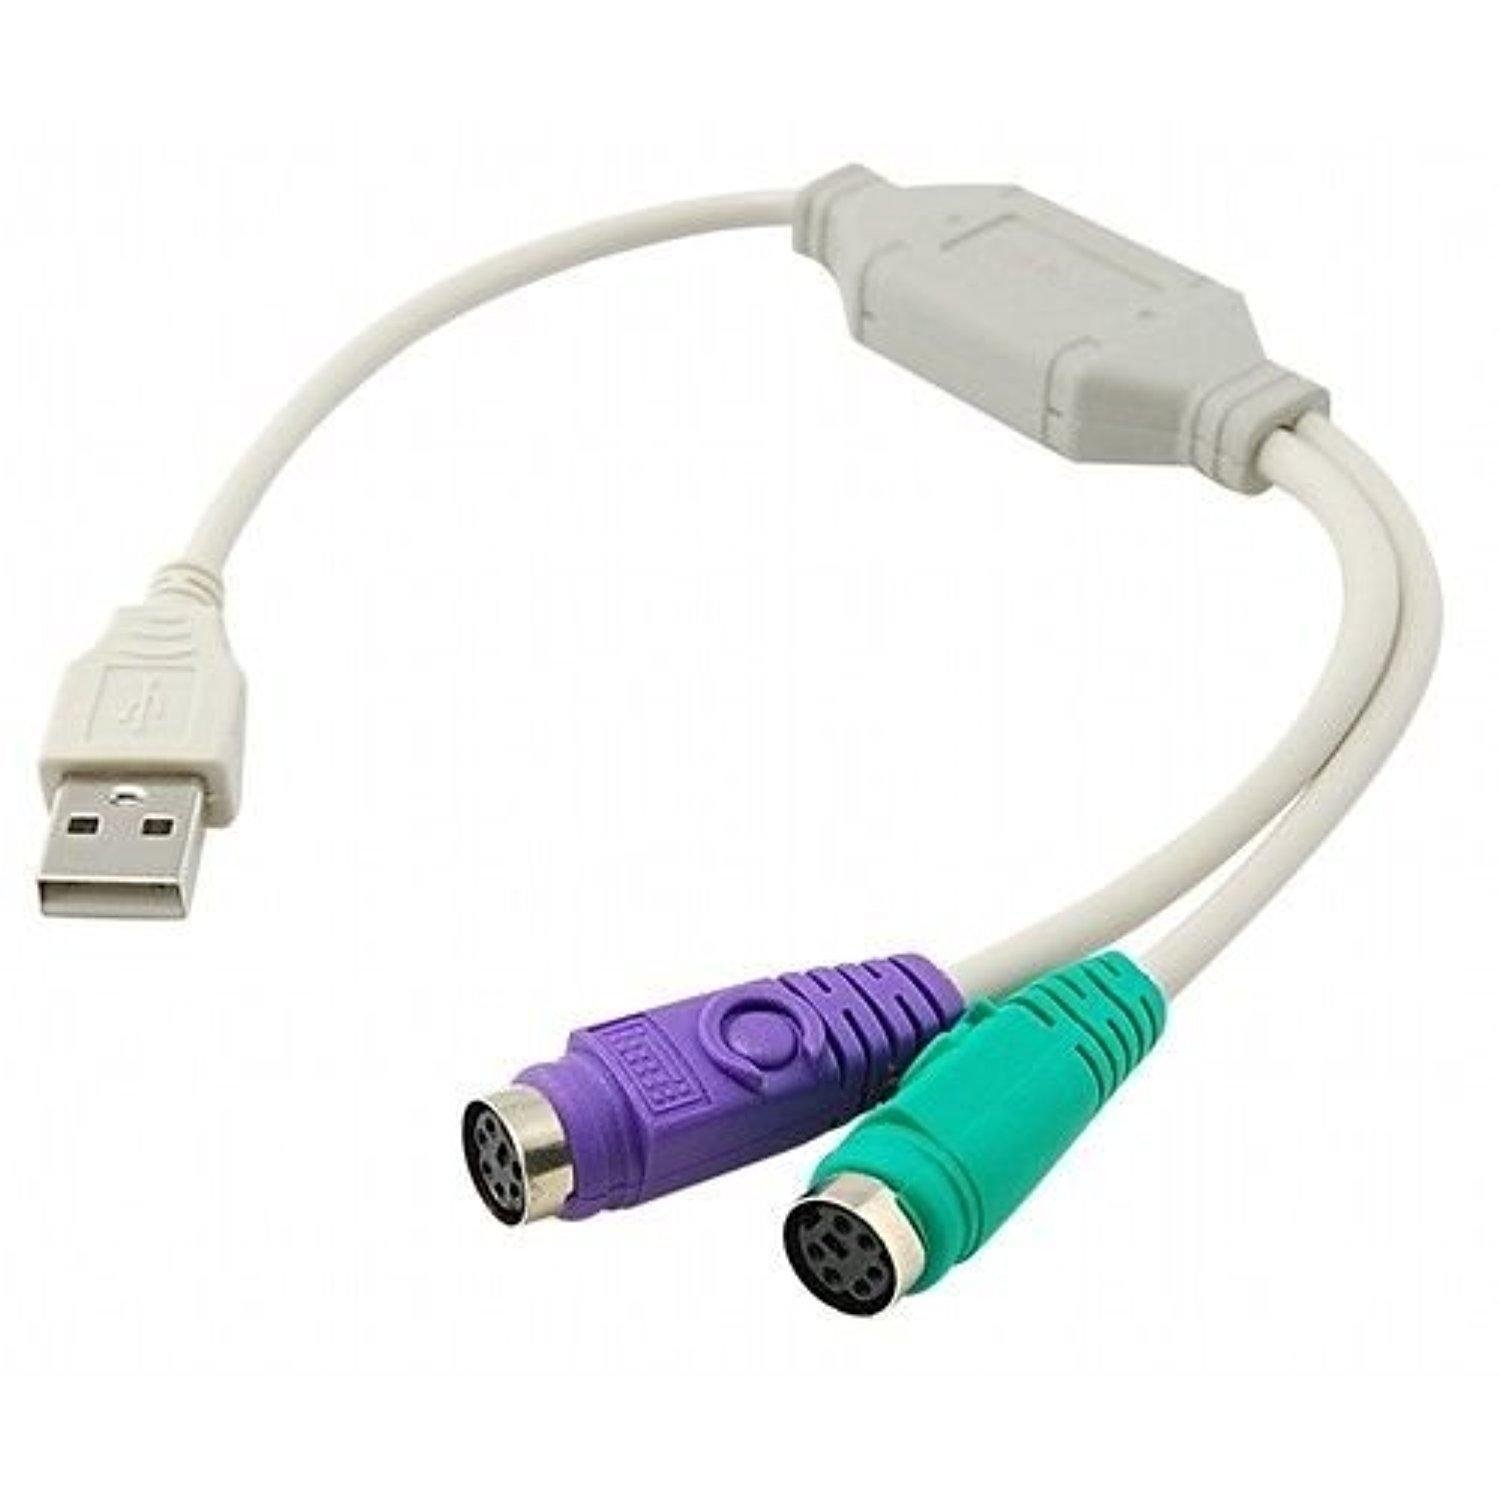 Converters and Extenders - USB TO 2PS2 Active Adapter, USB Type A Male to 2 PS/2 Female (Keyboard and Mouse, 6 Pin)